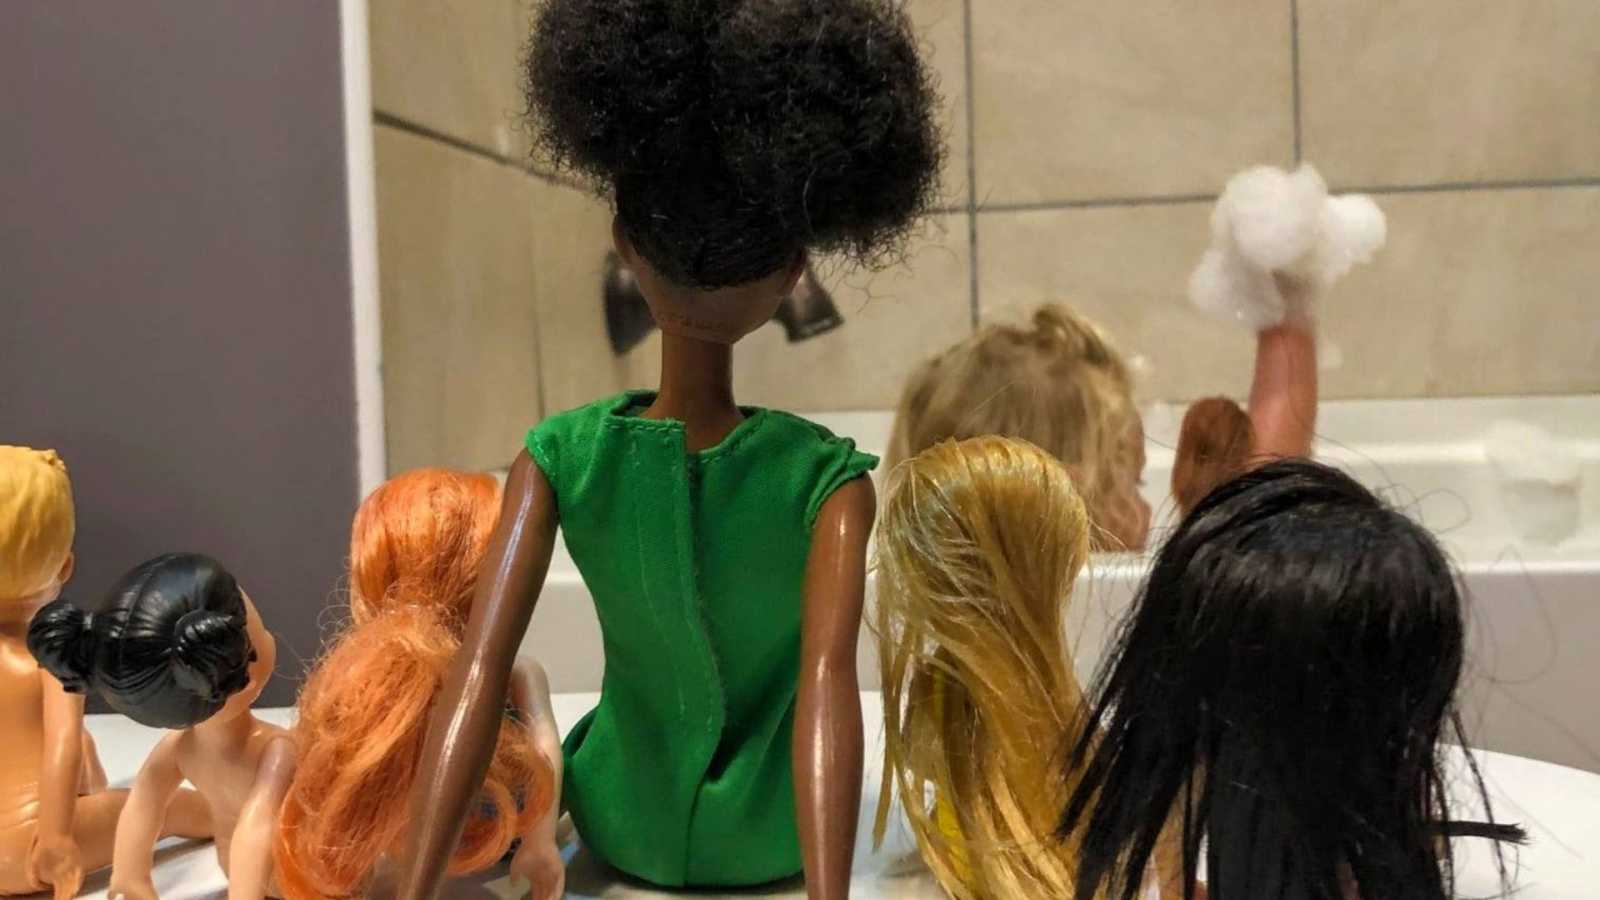 Mom uses different kinds of Barbies to teach daughter lesson on kindness, diversity, and inclusion